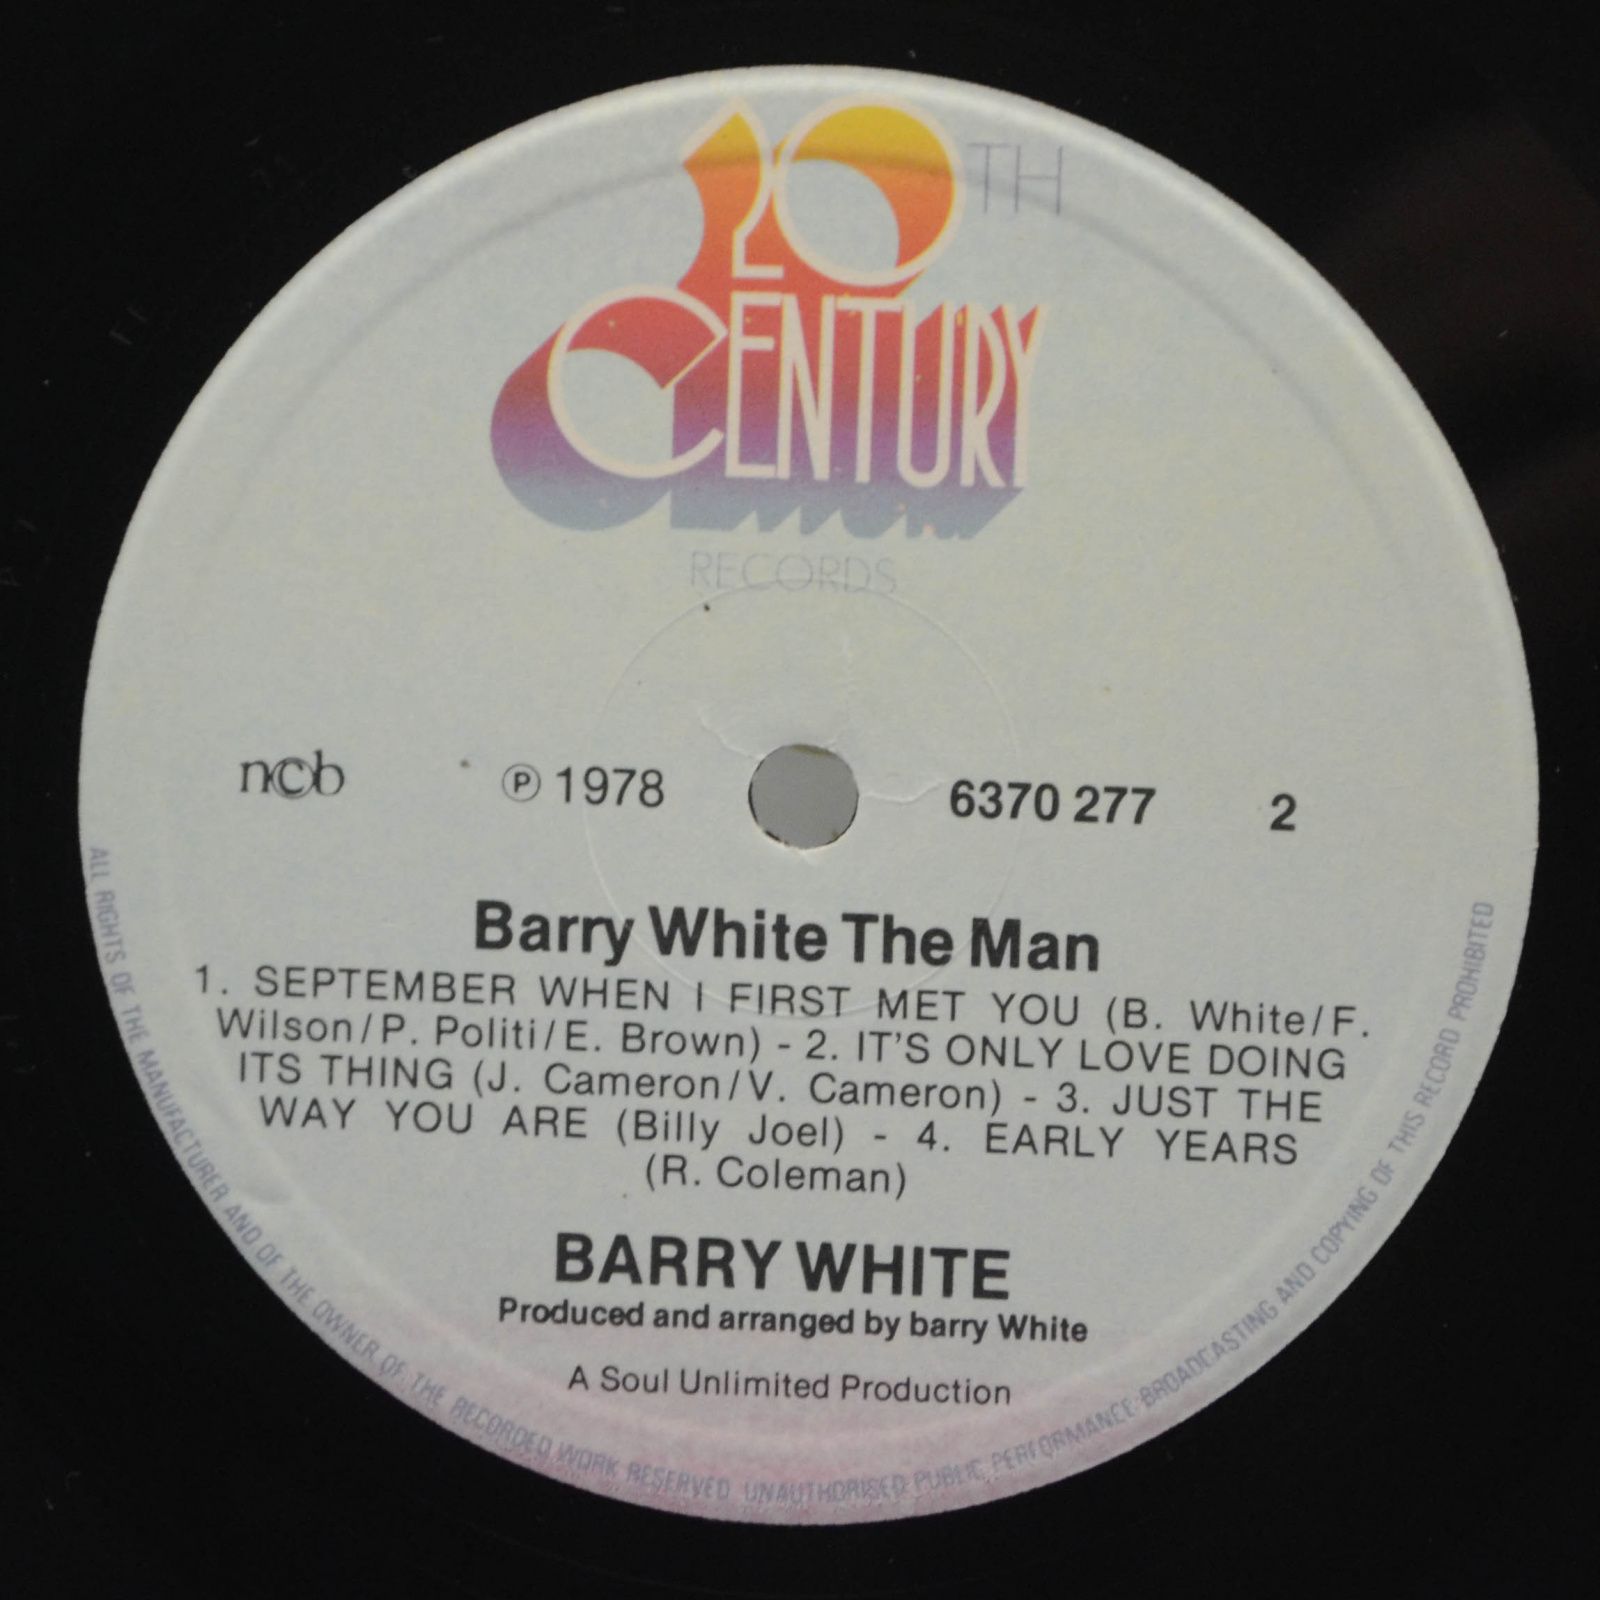 Barry White — The Man, 1978